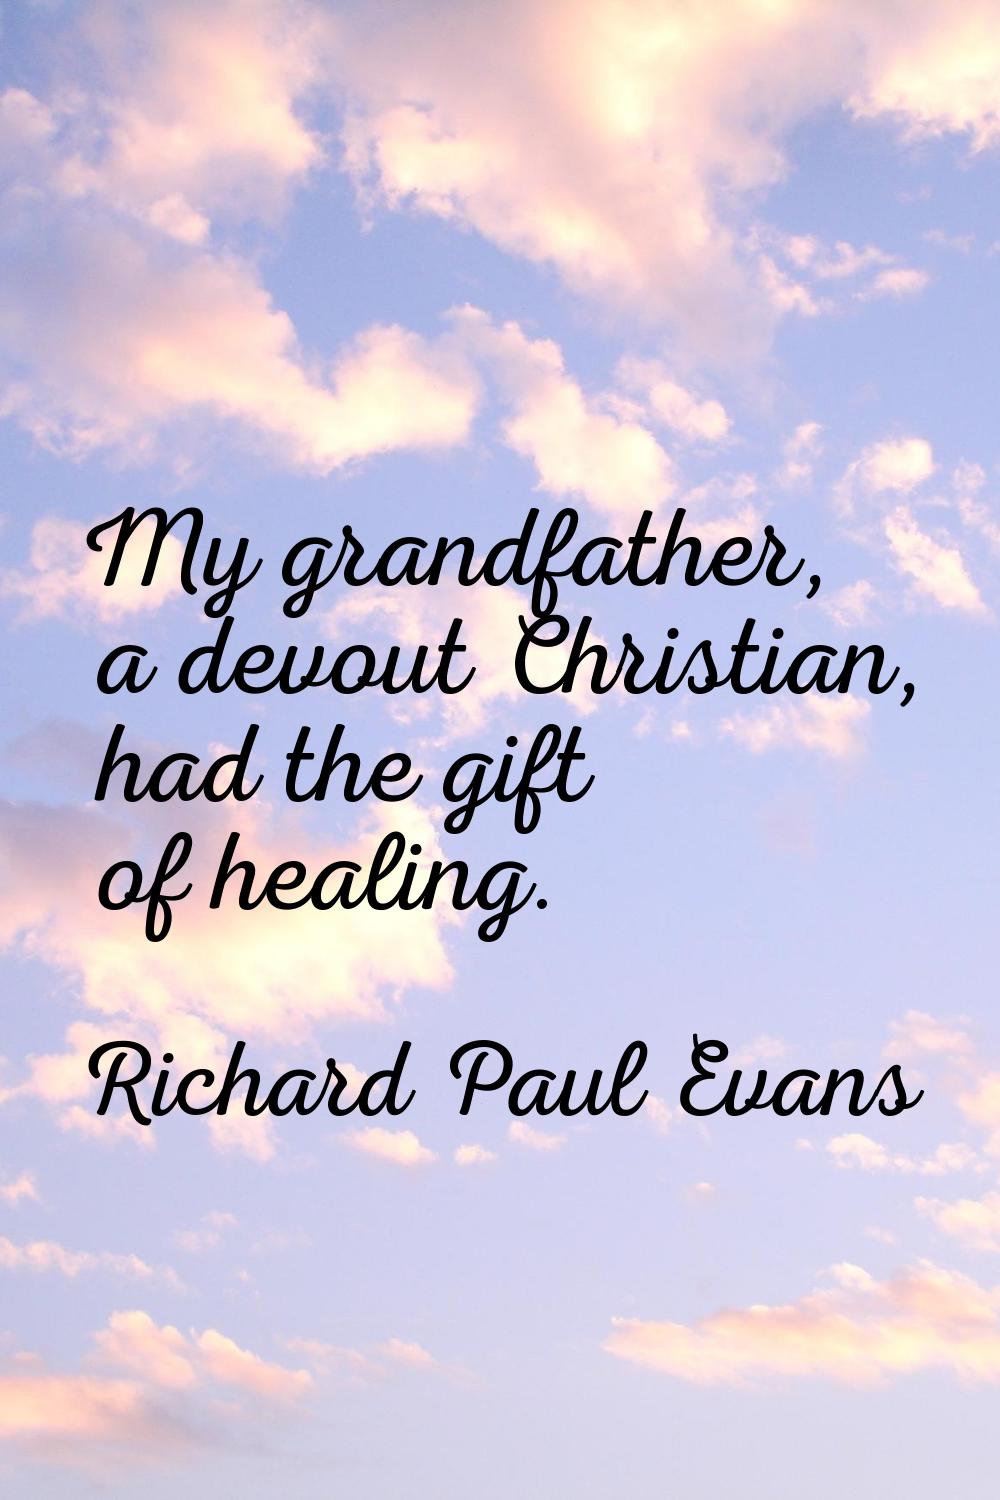 My grandfather, a devout Christian, had the gift of healing.